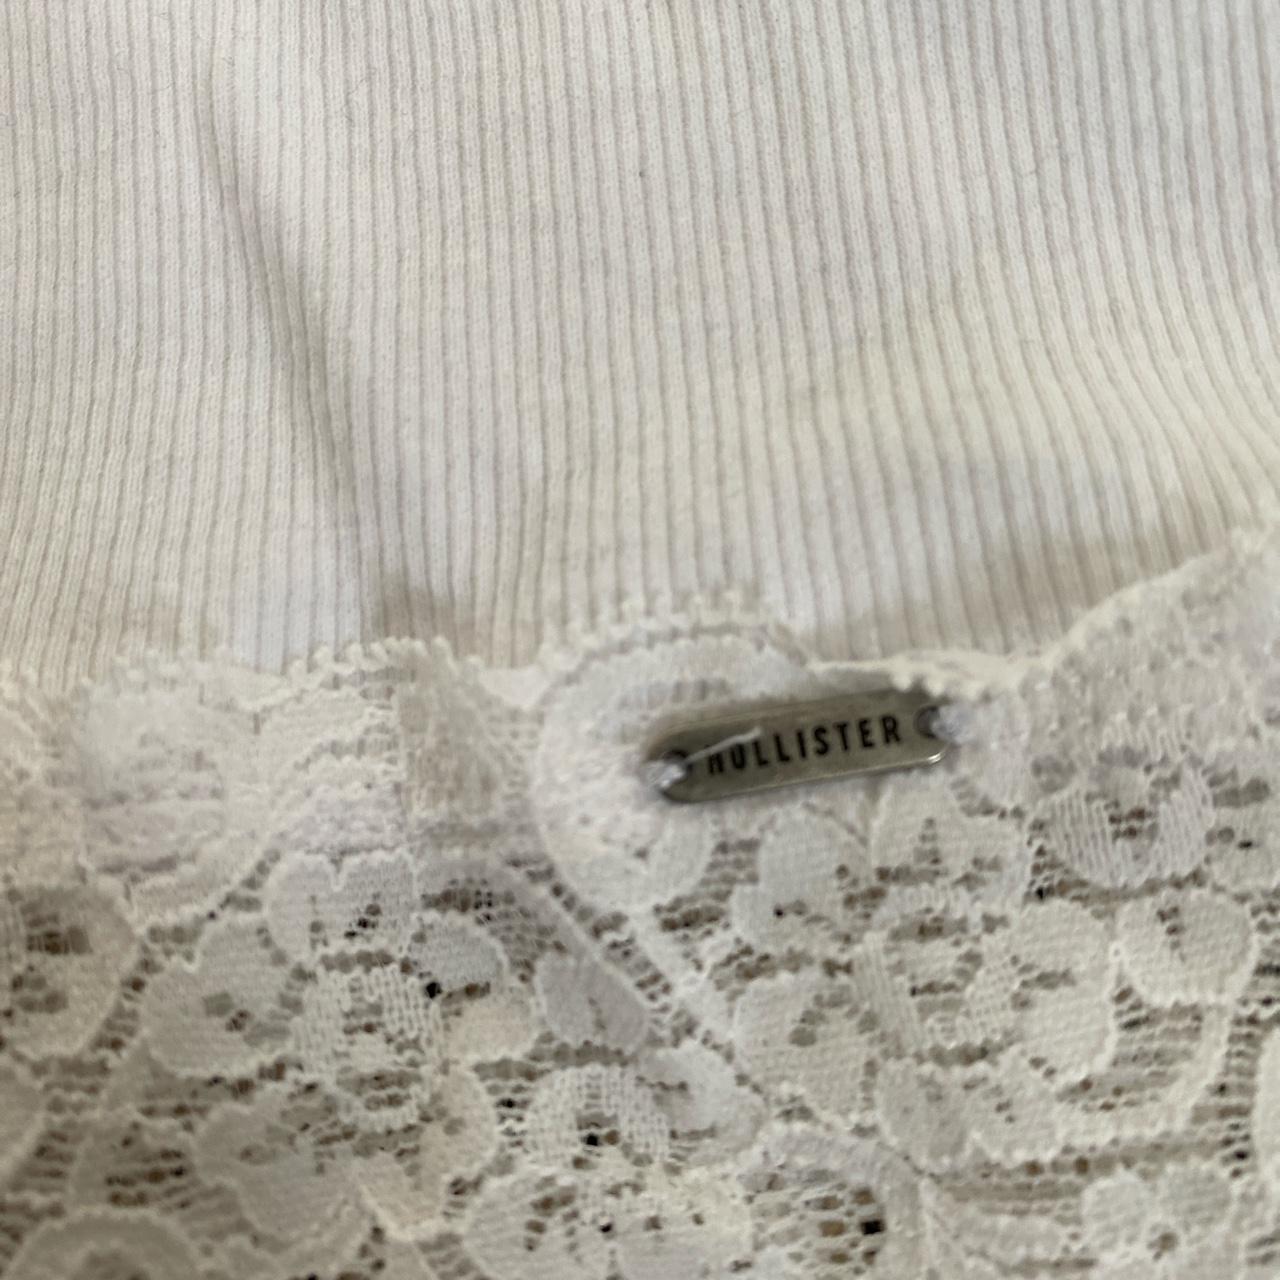 Hollister white lace trim baby tee, perfect condition